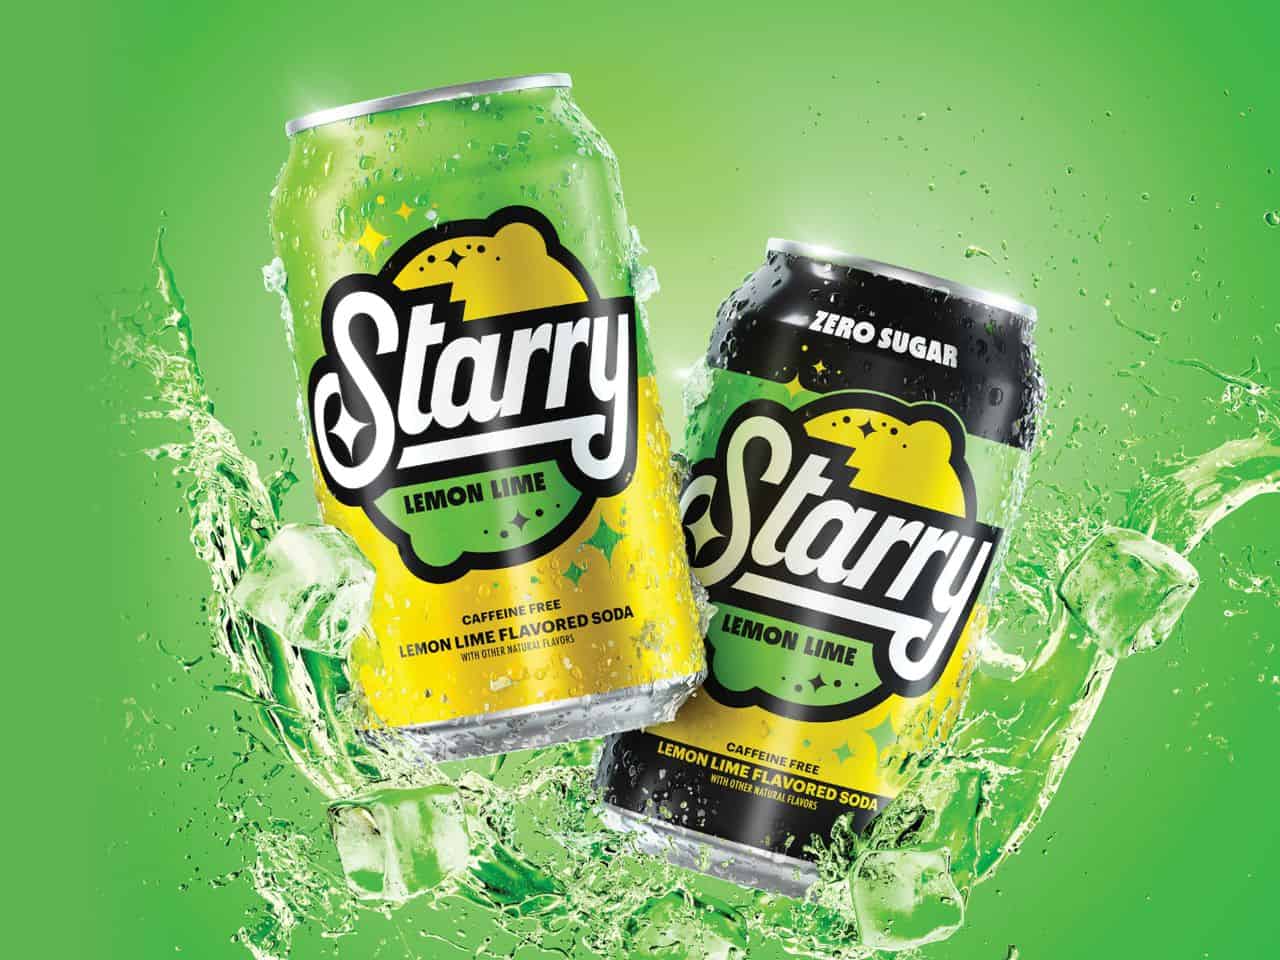 Promo shot of the drink Starry